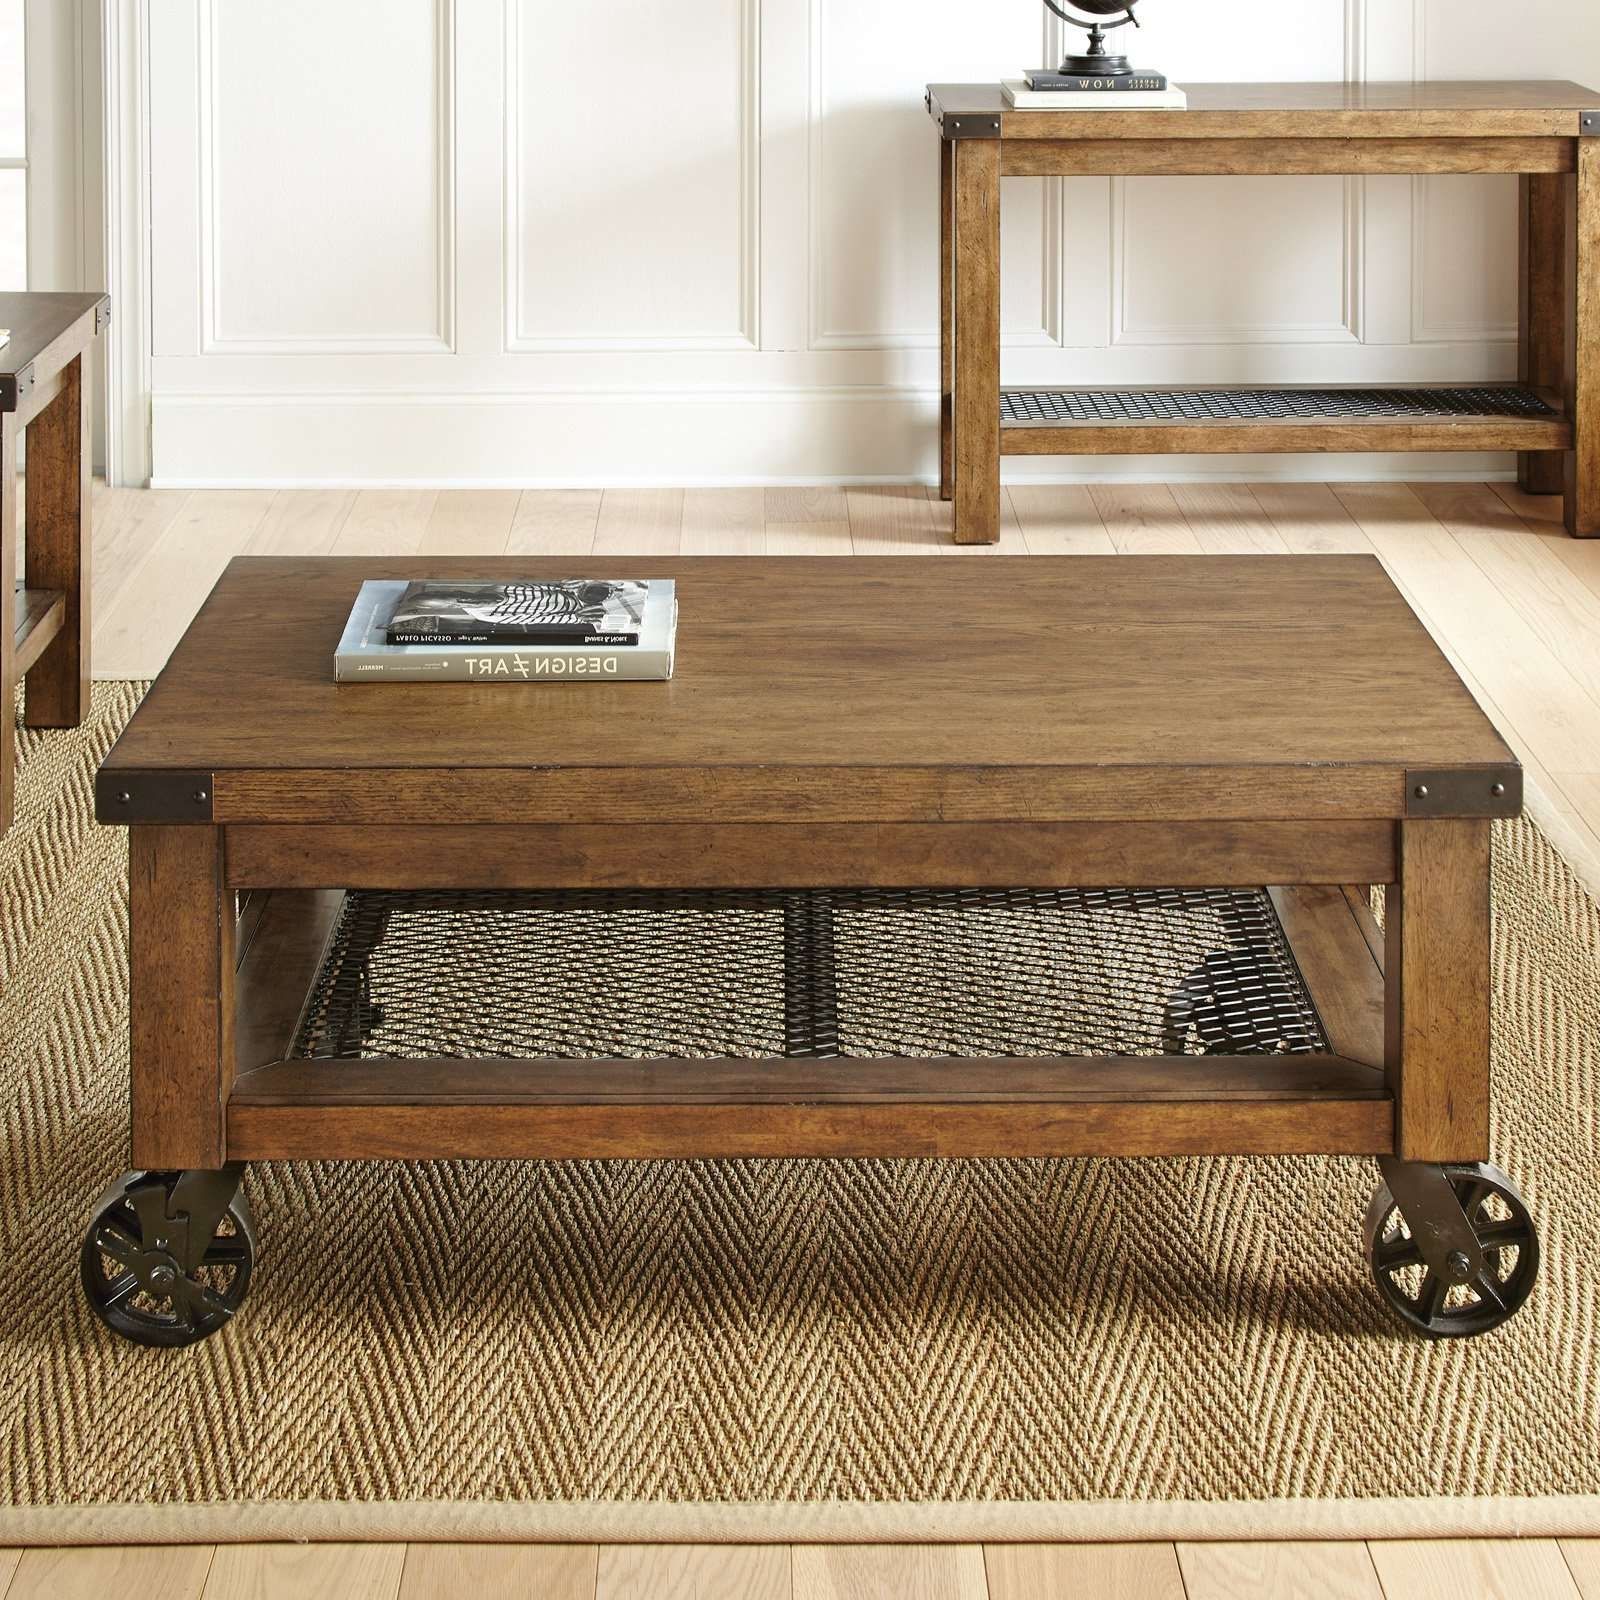 Favorite Rustic Coffee Table With Wheels Throughout Coffee Table : Marvelous Small Table On Wheels Black Glass Coffee (View 1 of 20)